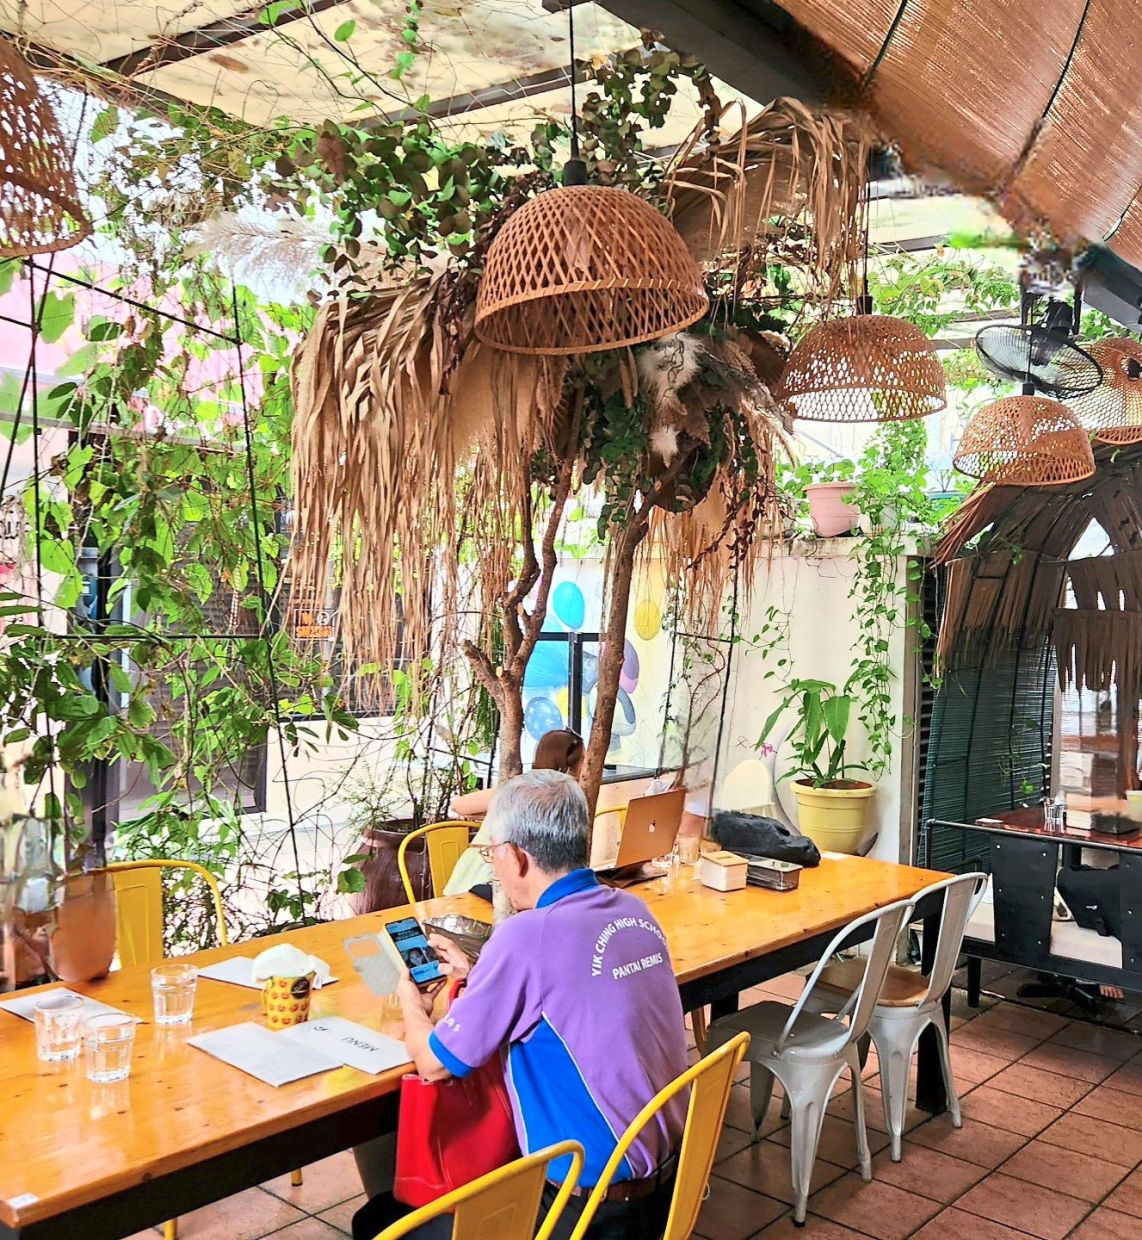 The greenery and hanging baskets give the cafe an inviting tropical setting.